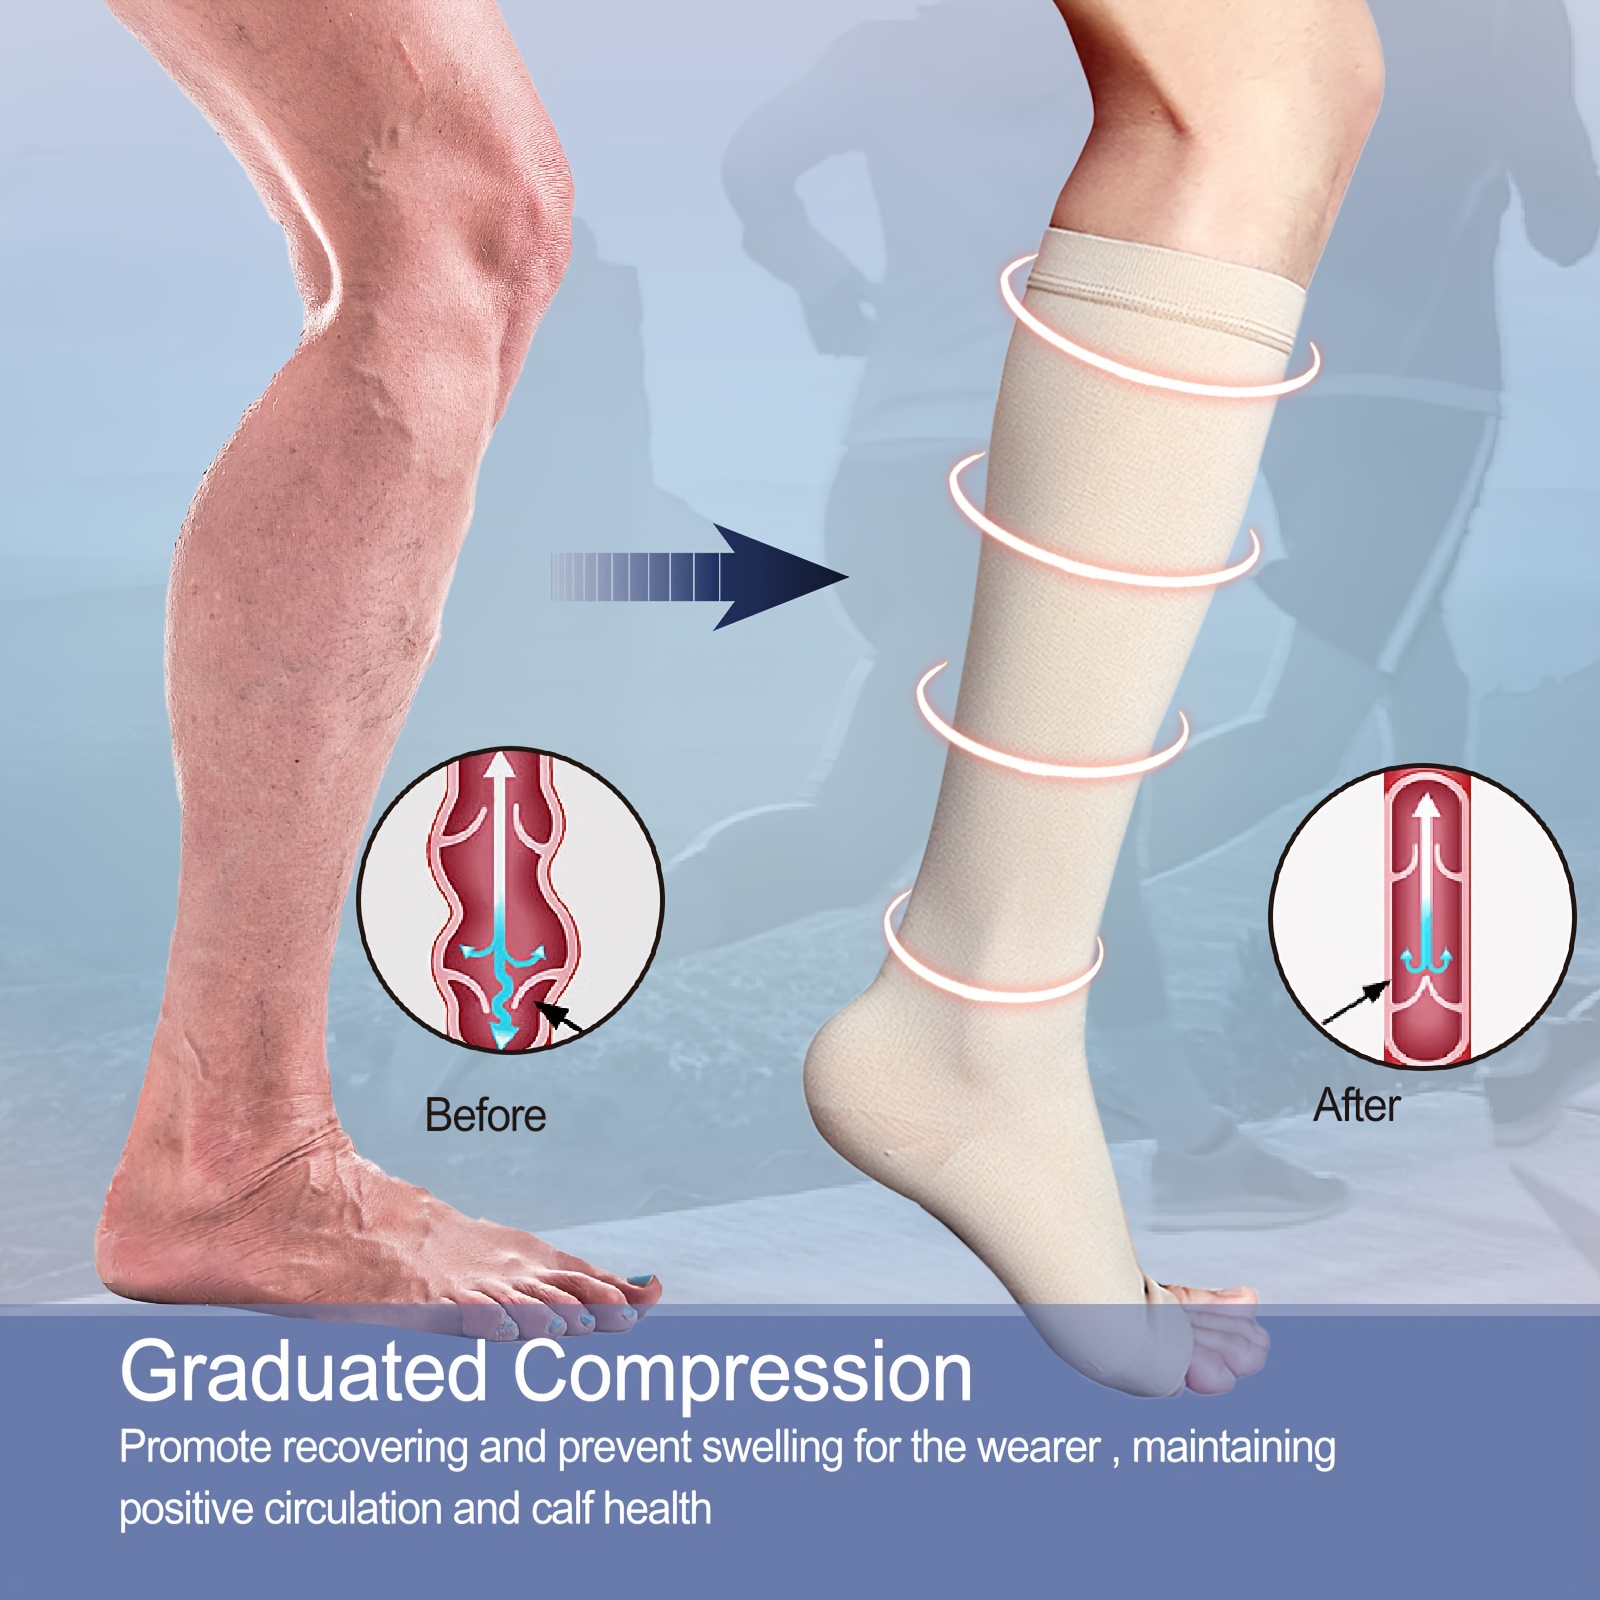 IDEALSLIM Womens Medical Compression Stockings 23 32mmHg Nhs Graduate  Scheme Pressure For Varicose Veins And Ankle Length 201109 From Dou003,  $16.17